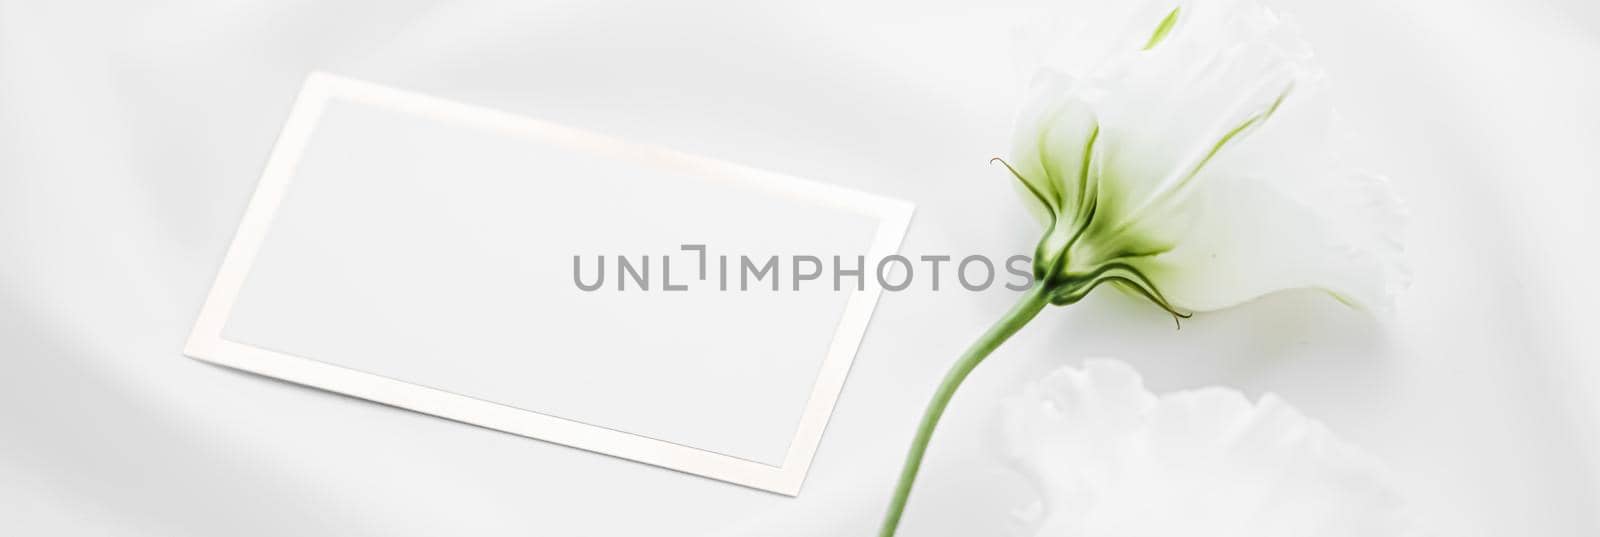 Wedding invitation or gift card and white rose flowers on silk fabric as bridal flatlay background, blank paper and holiday branding, flat lay design concept